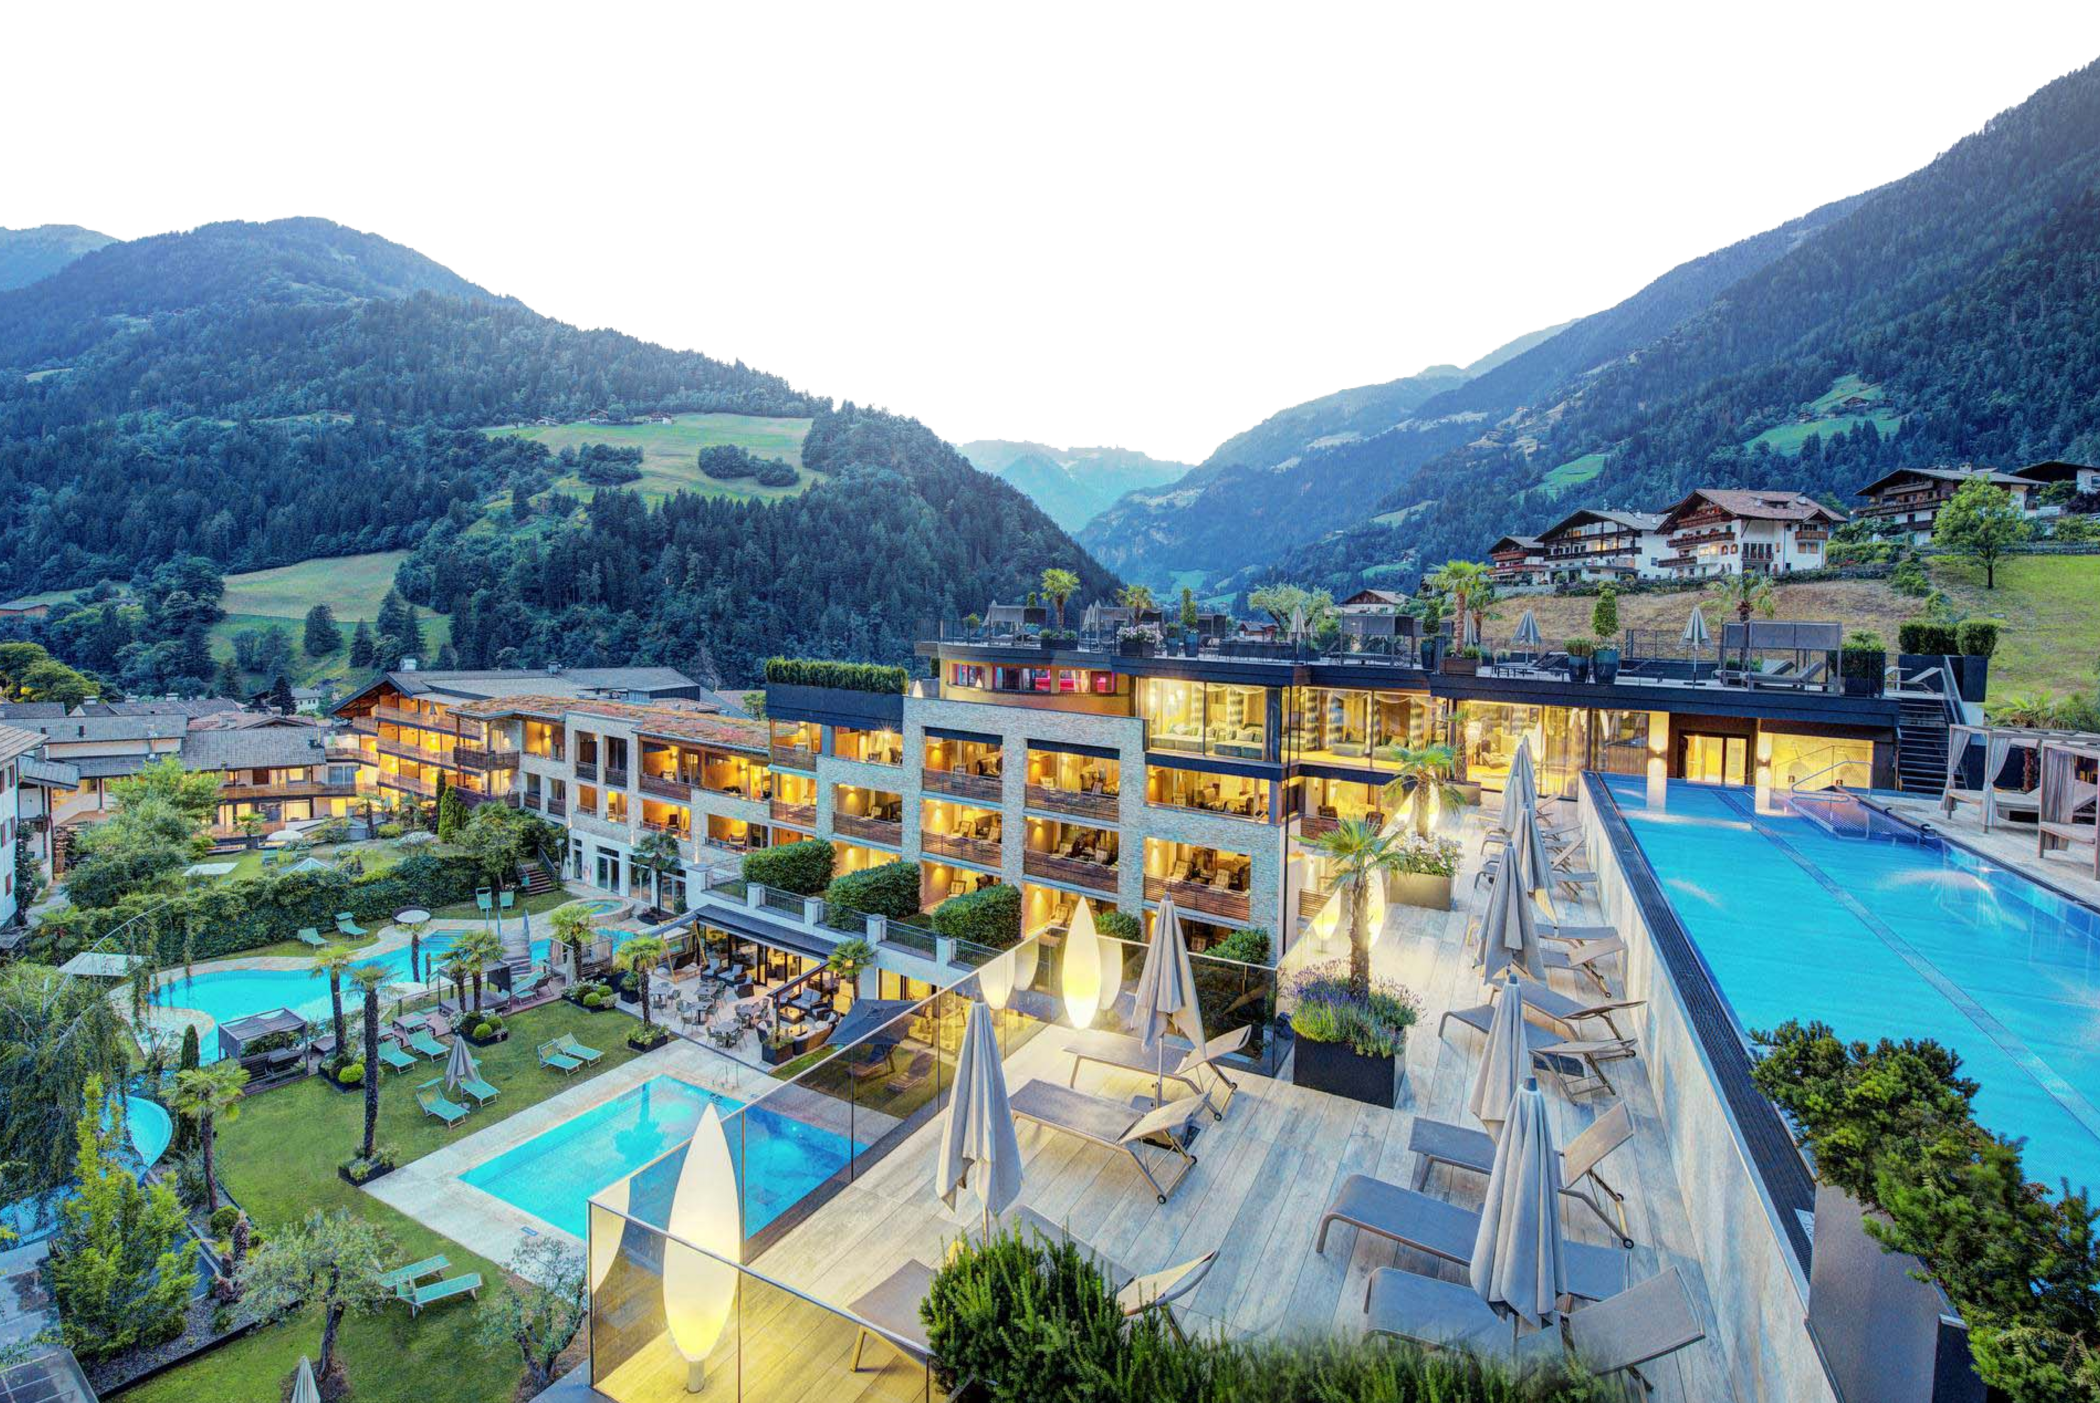 Hotel in Val Passiria/Passeiertal with 4-Star Superior